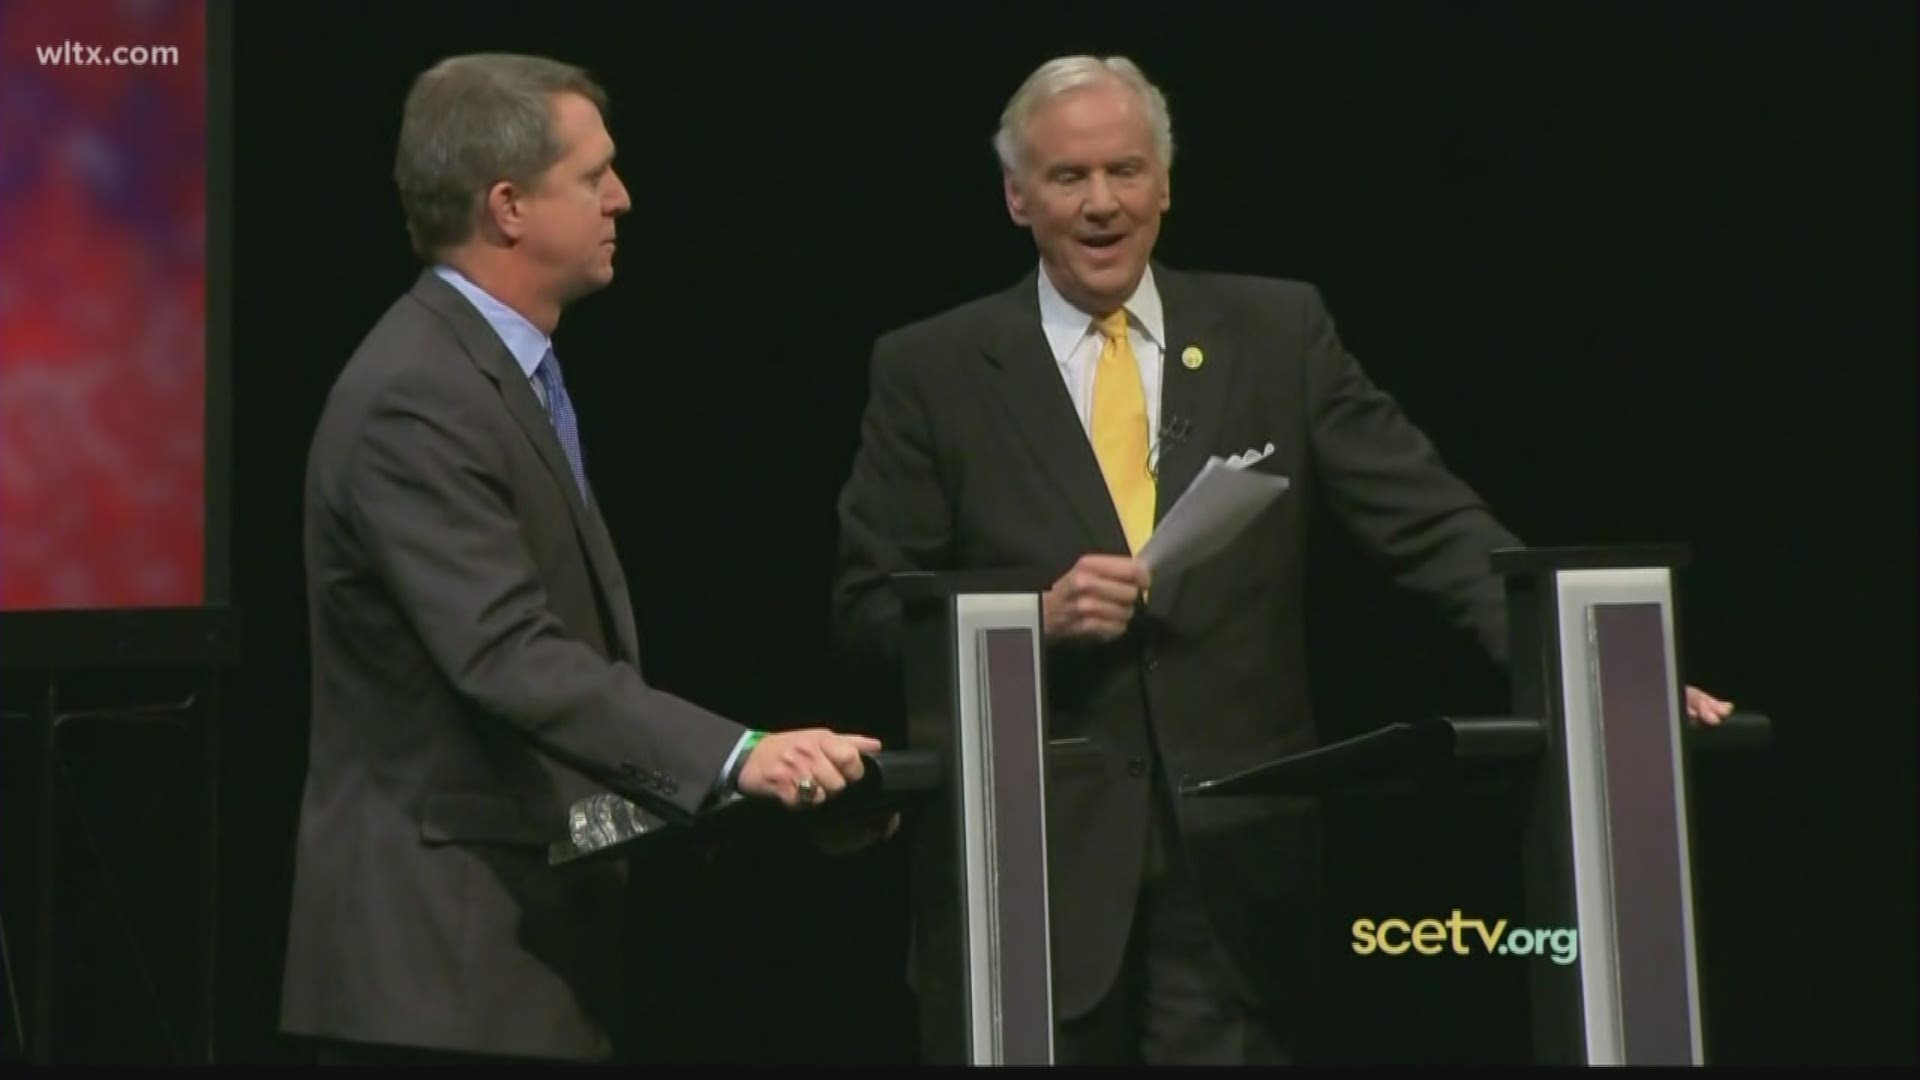 The two candidates for governor met for the first of their two televised debates.